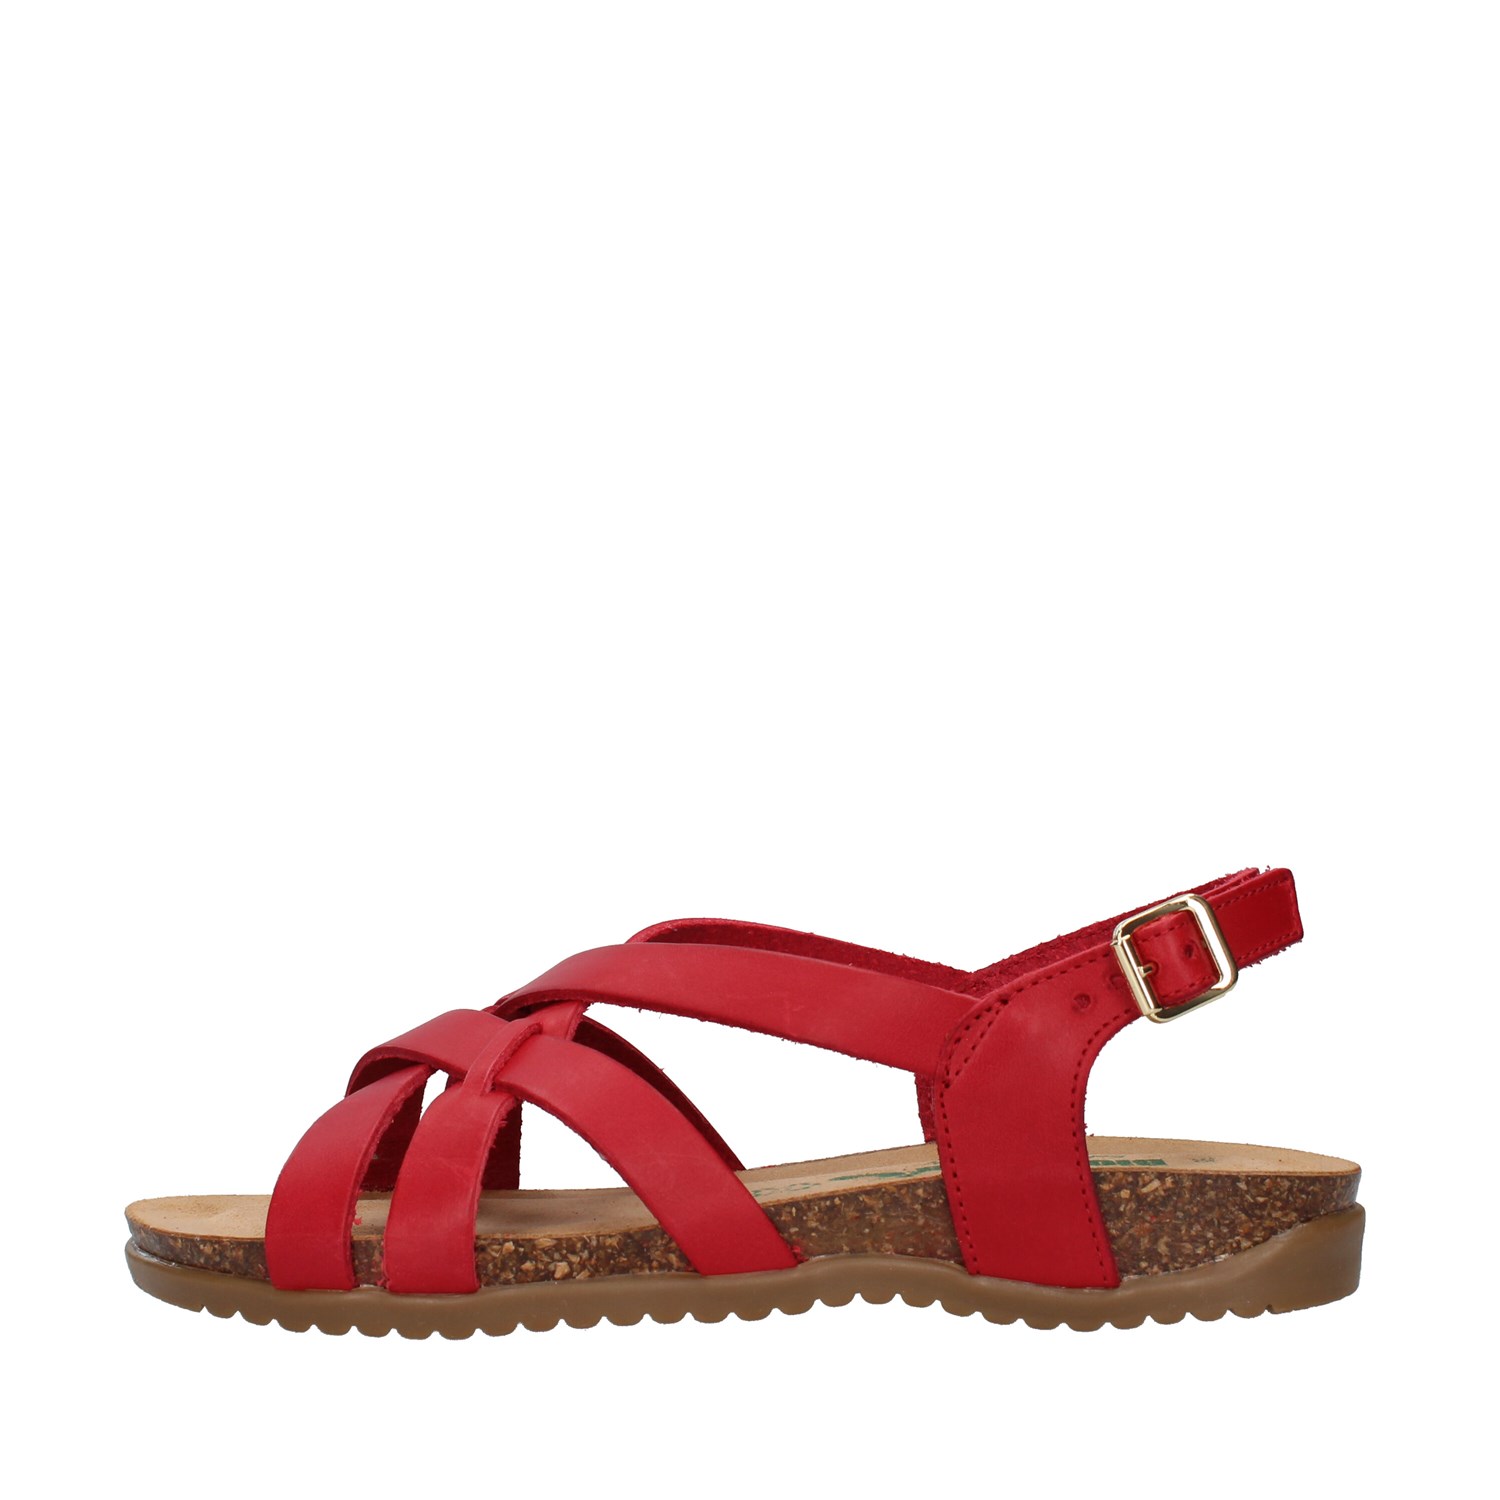 Bionatura Shoes Woman Sandals RED 34A2168